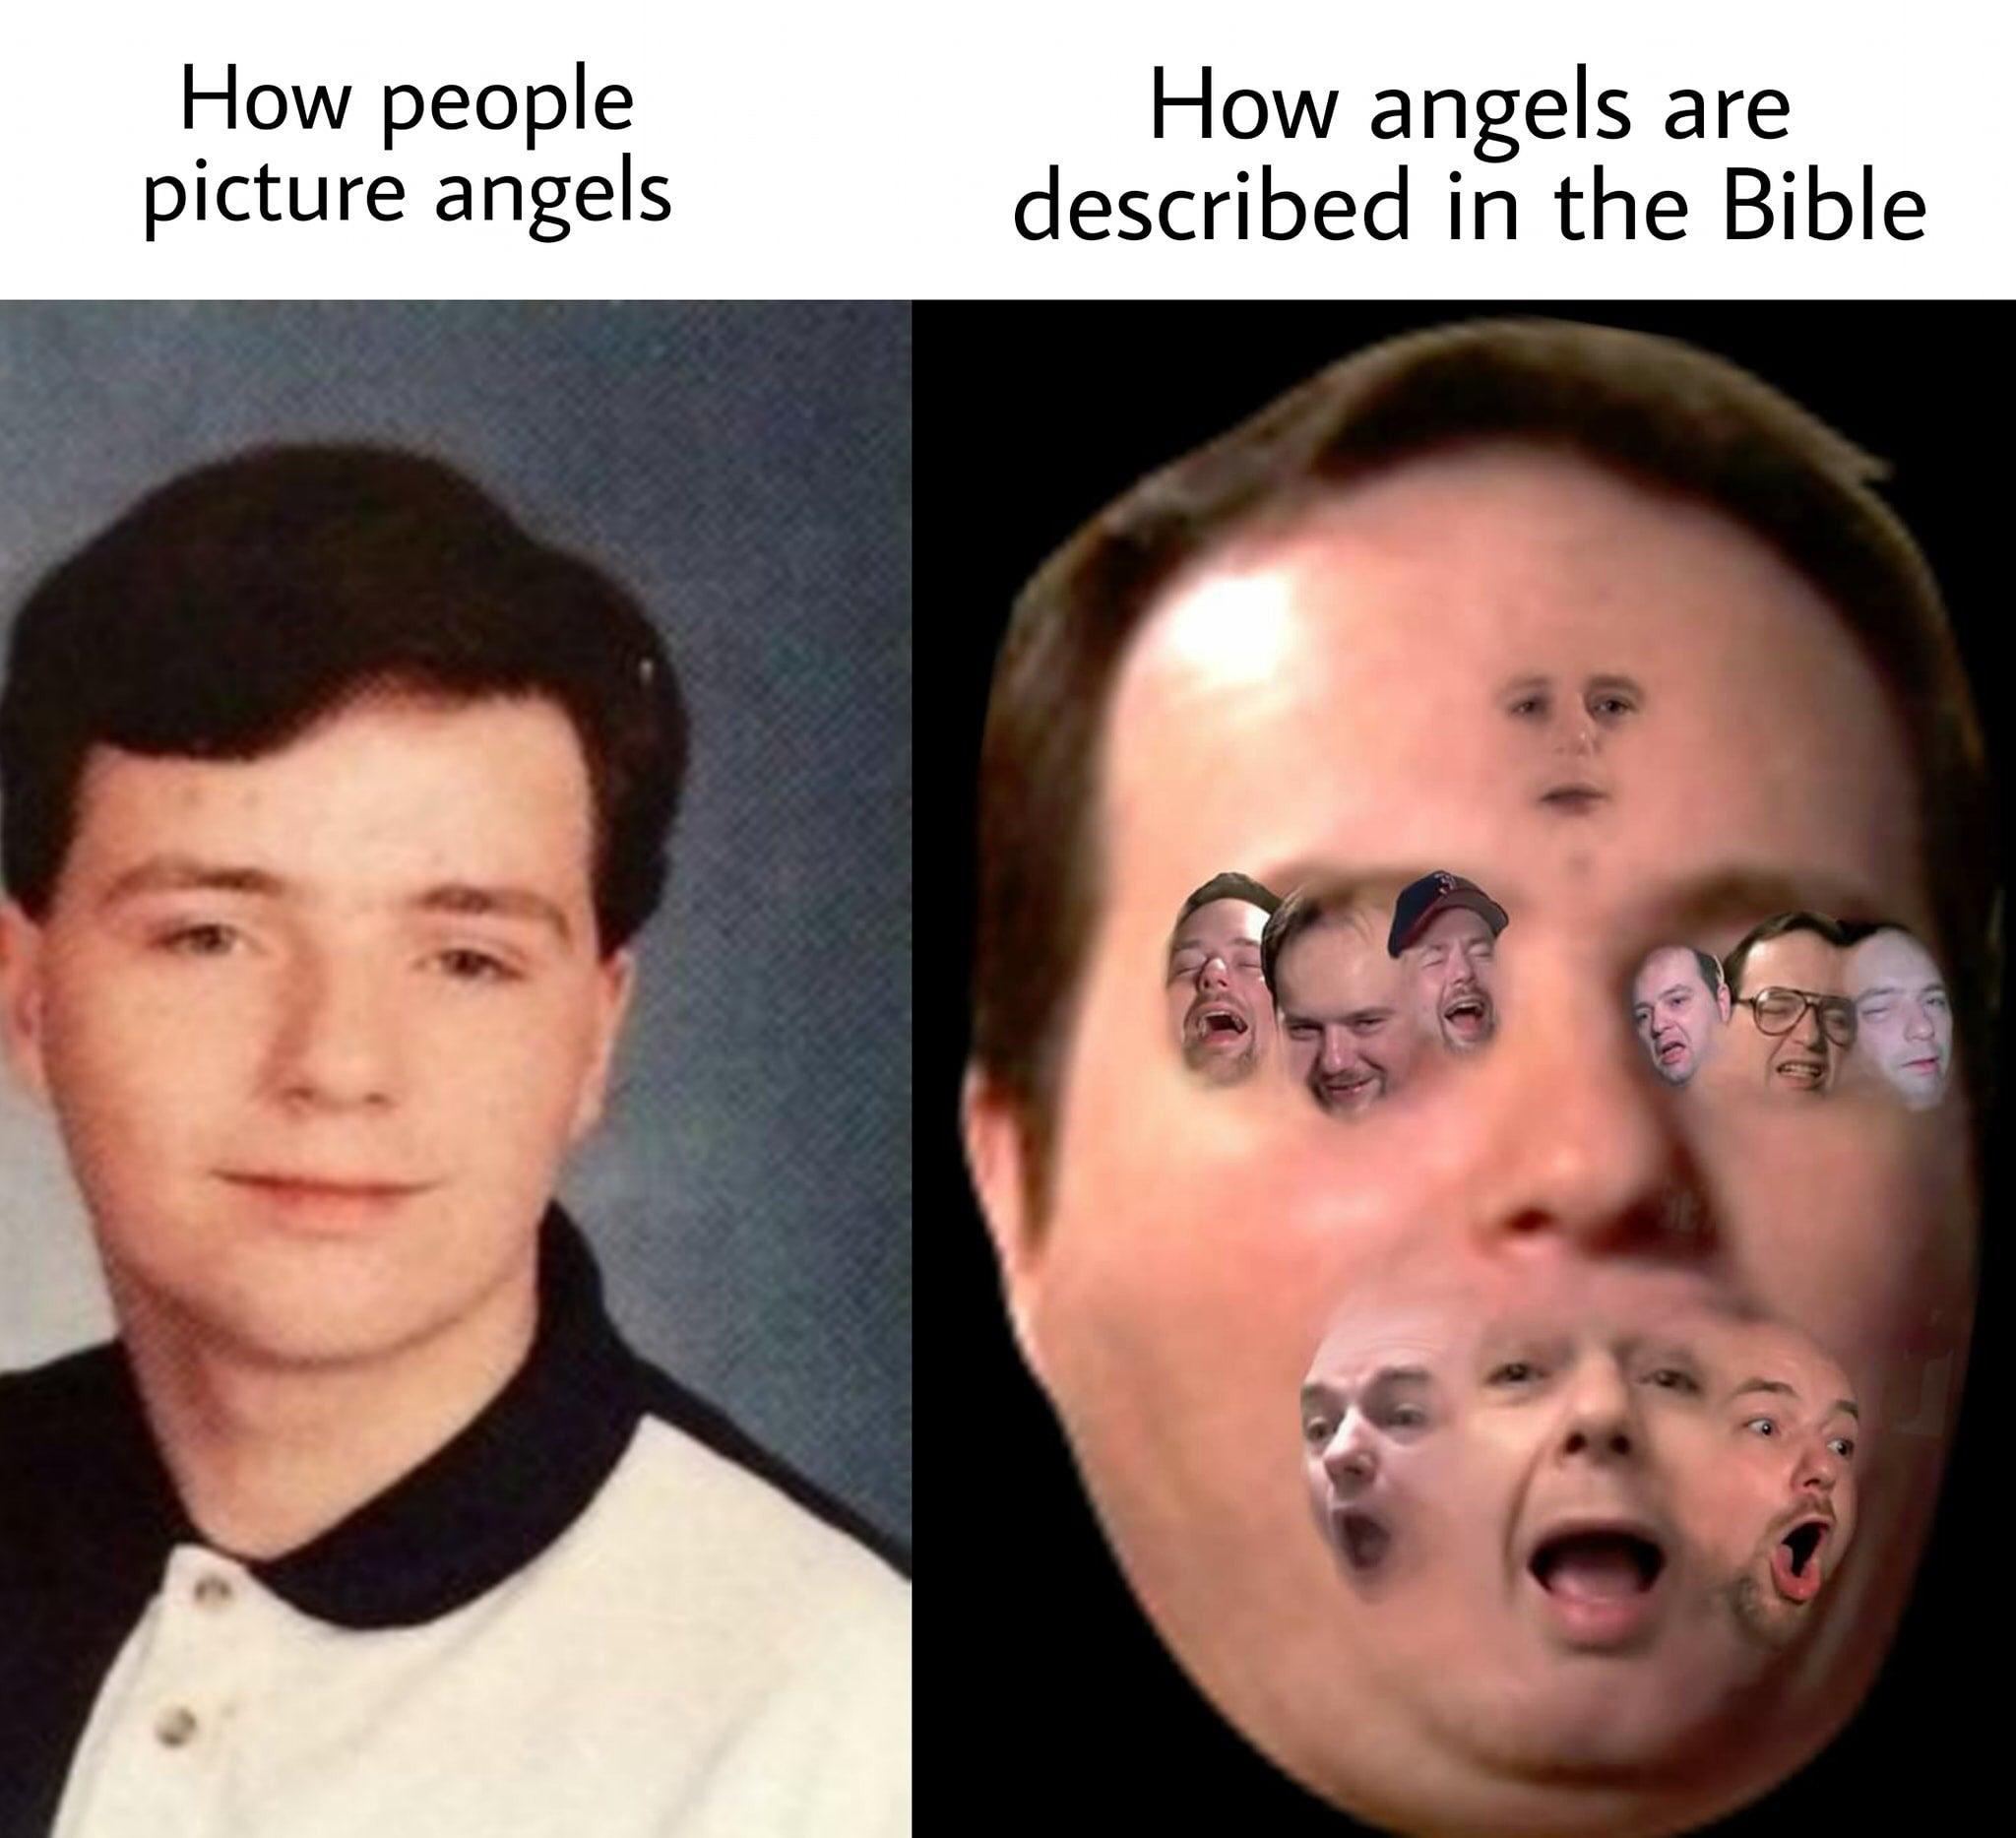 head - How people picture angels How angels are described in the Bible